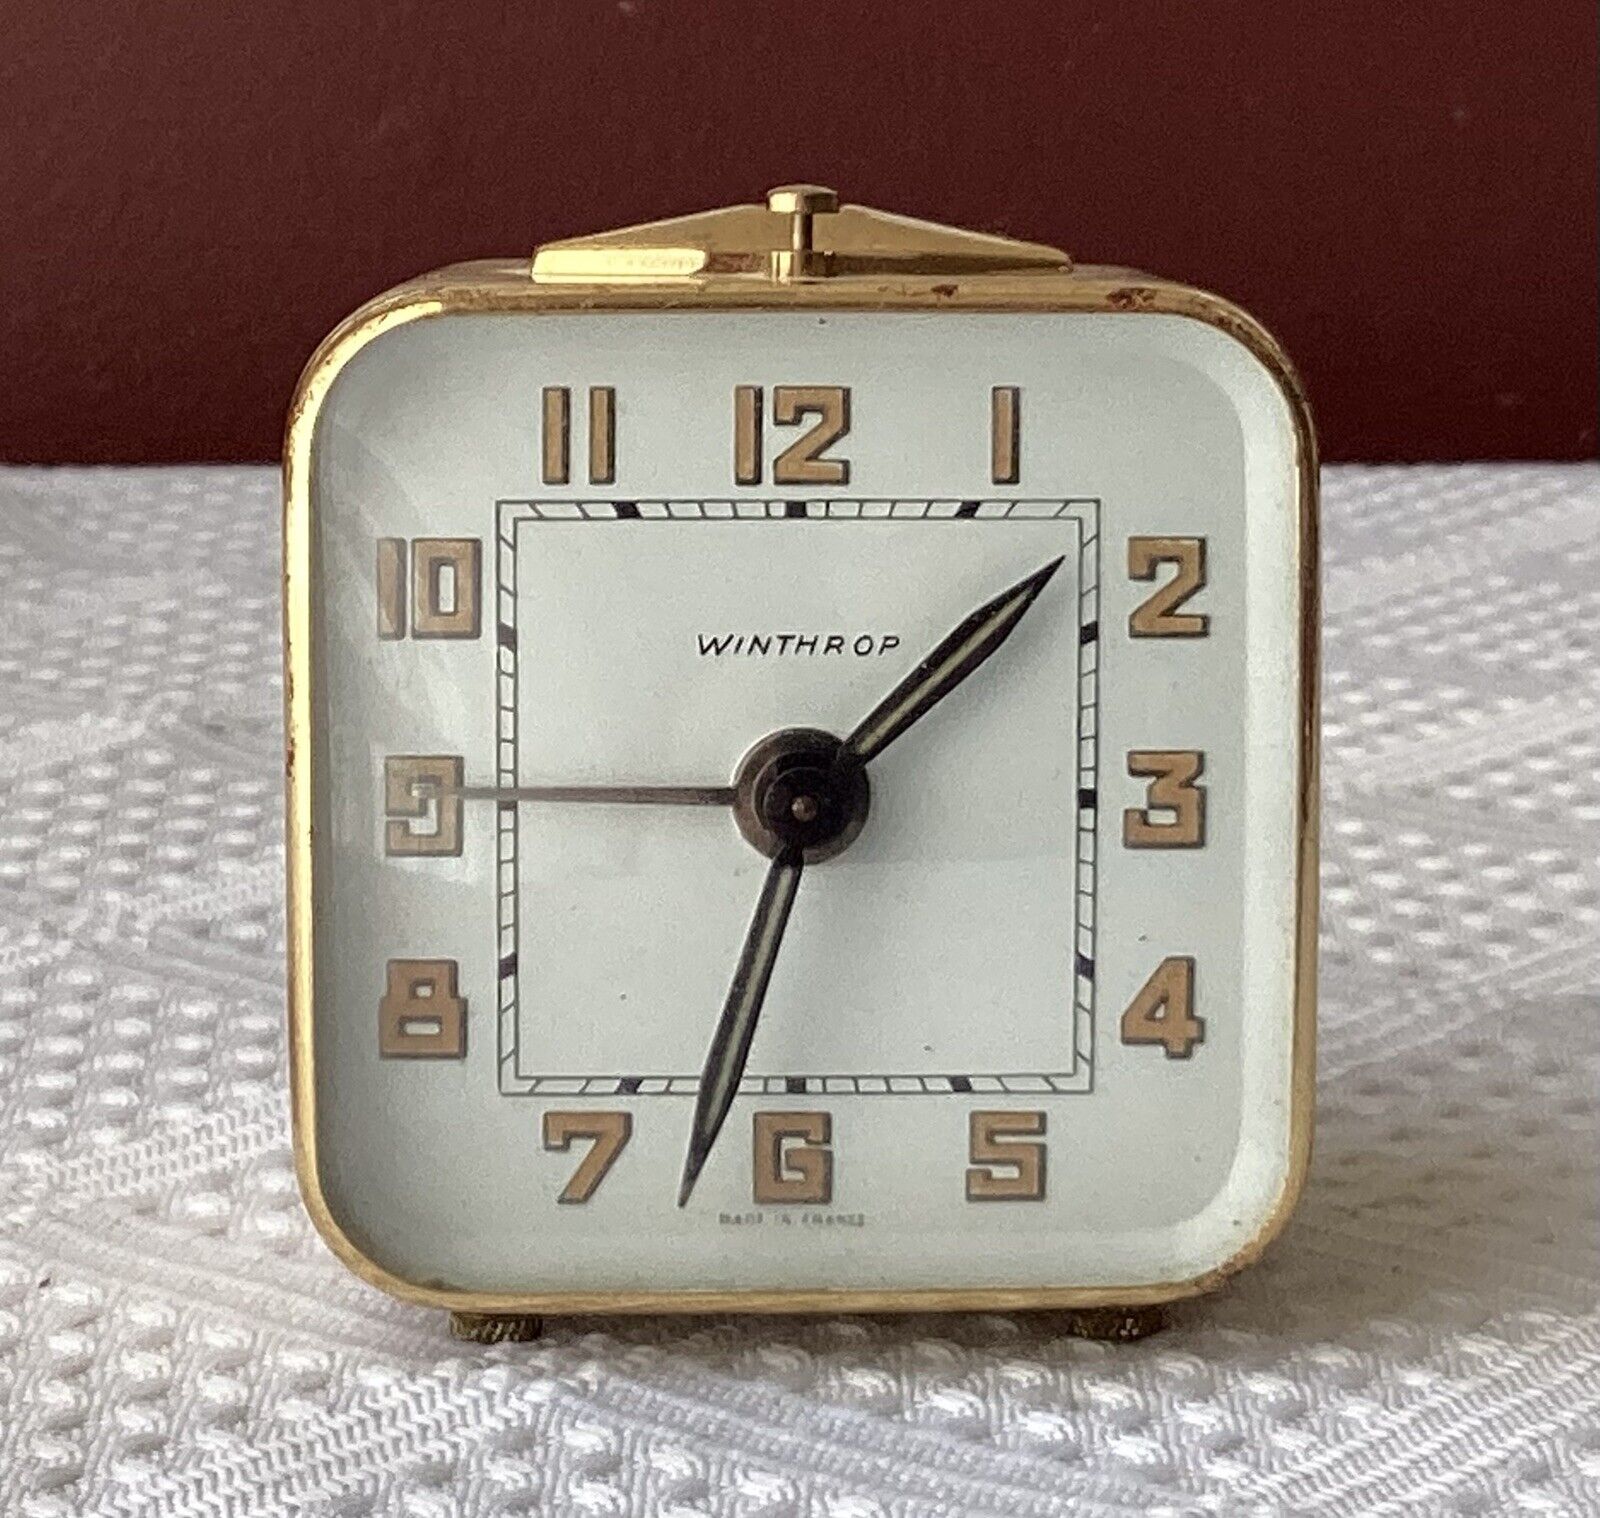 VTG Very Rare Winthrop Mechanical Travel Clock W. Alarm Made in France, Working